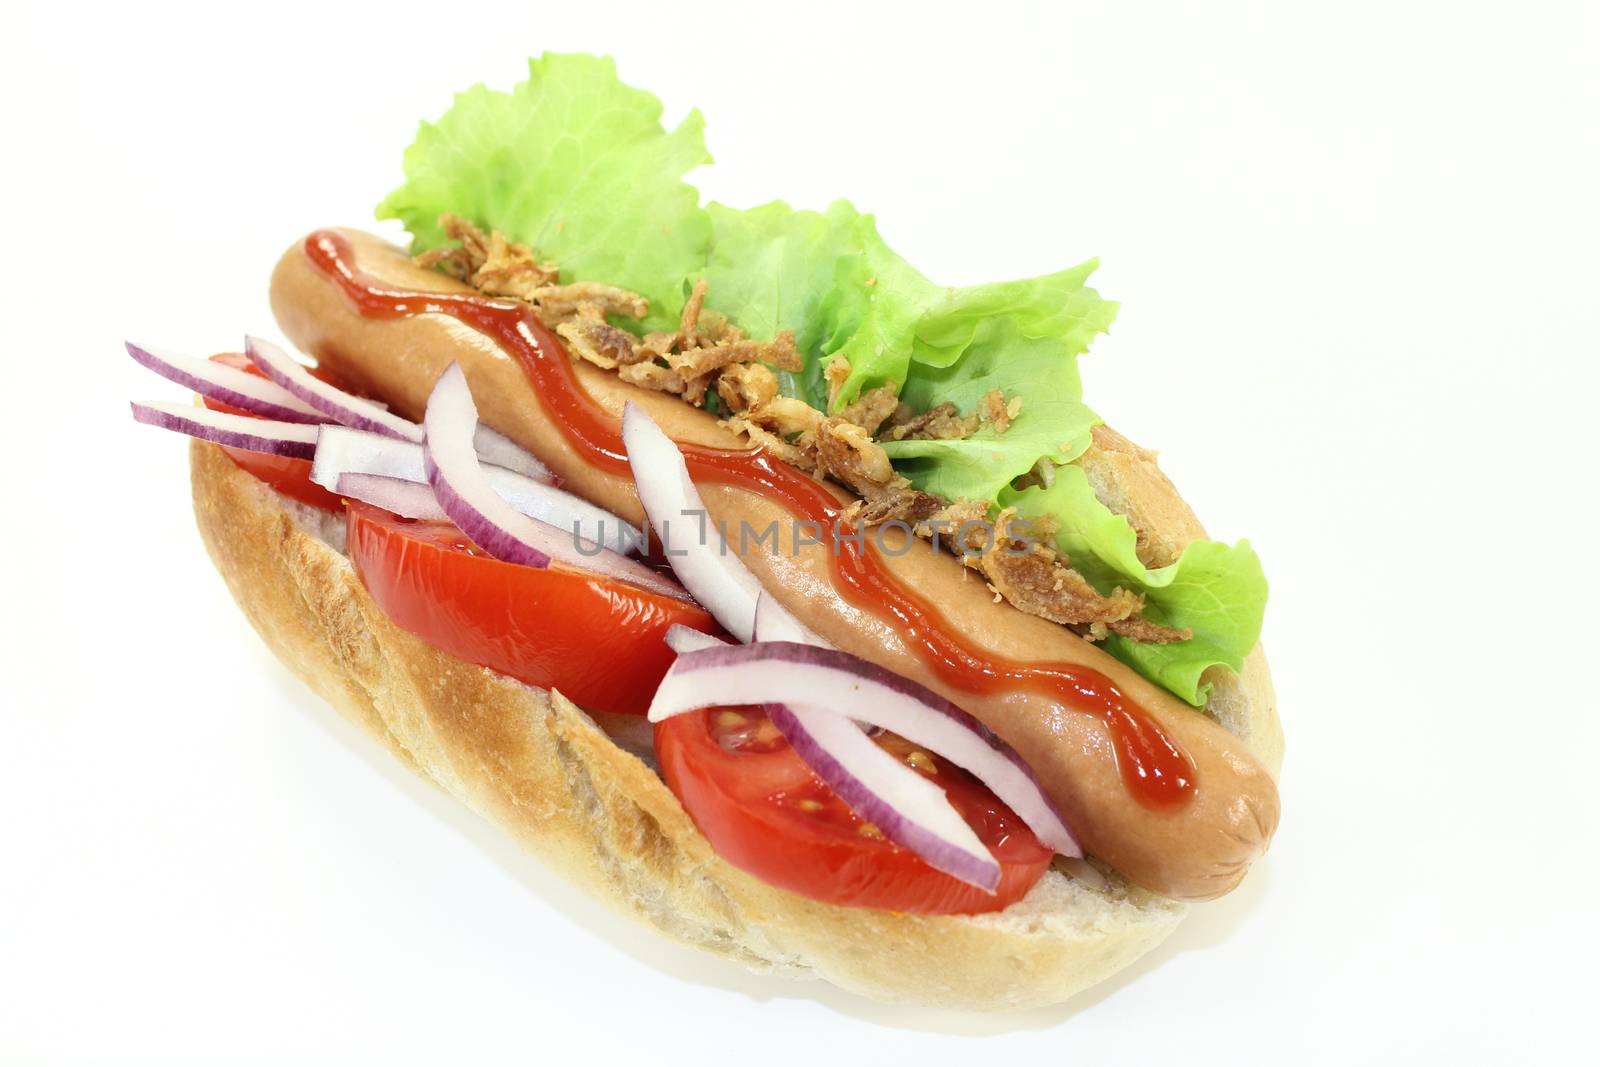 a hot dog with tomato and salad against white background